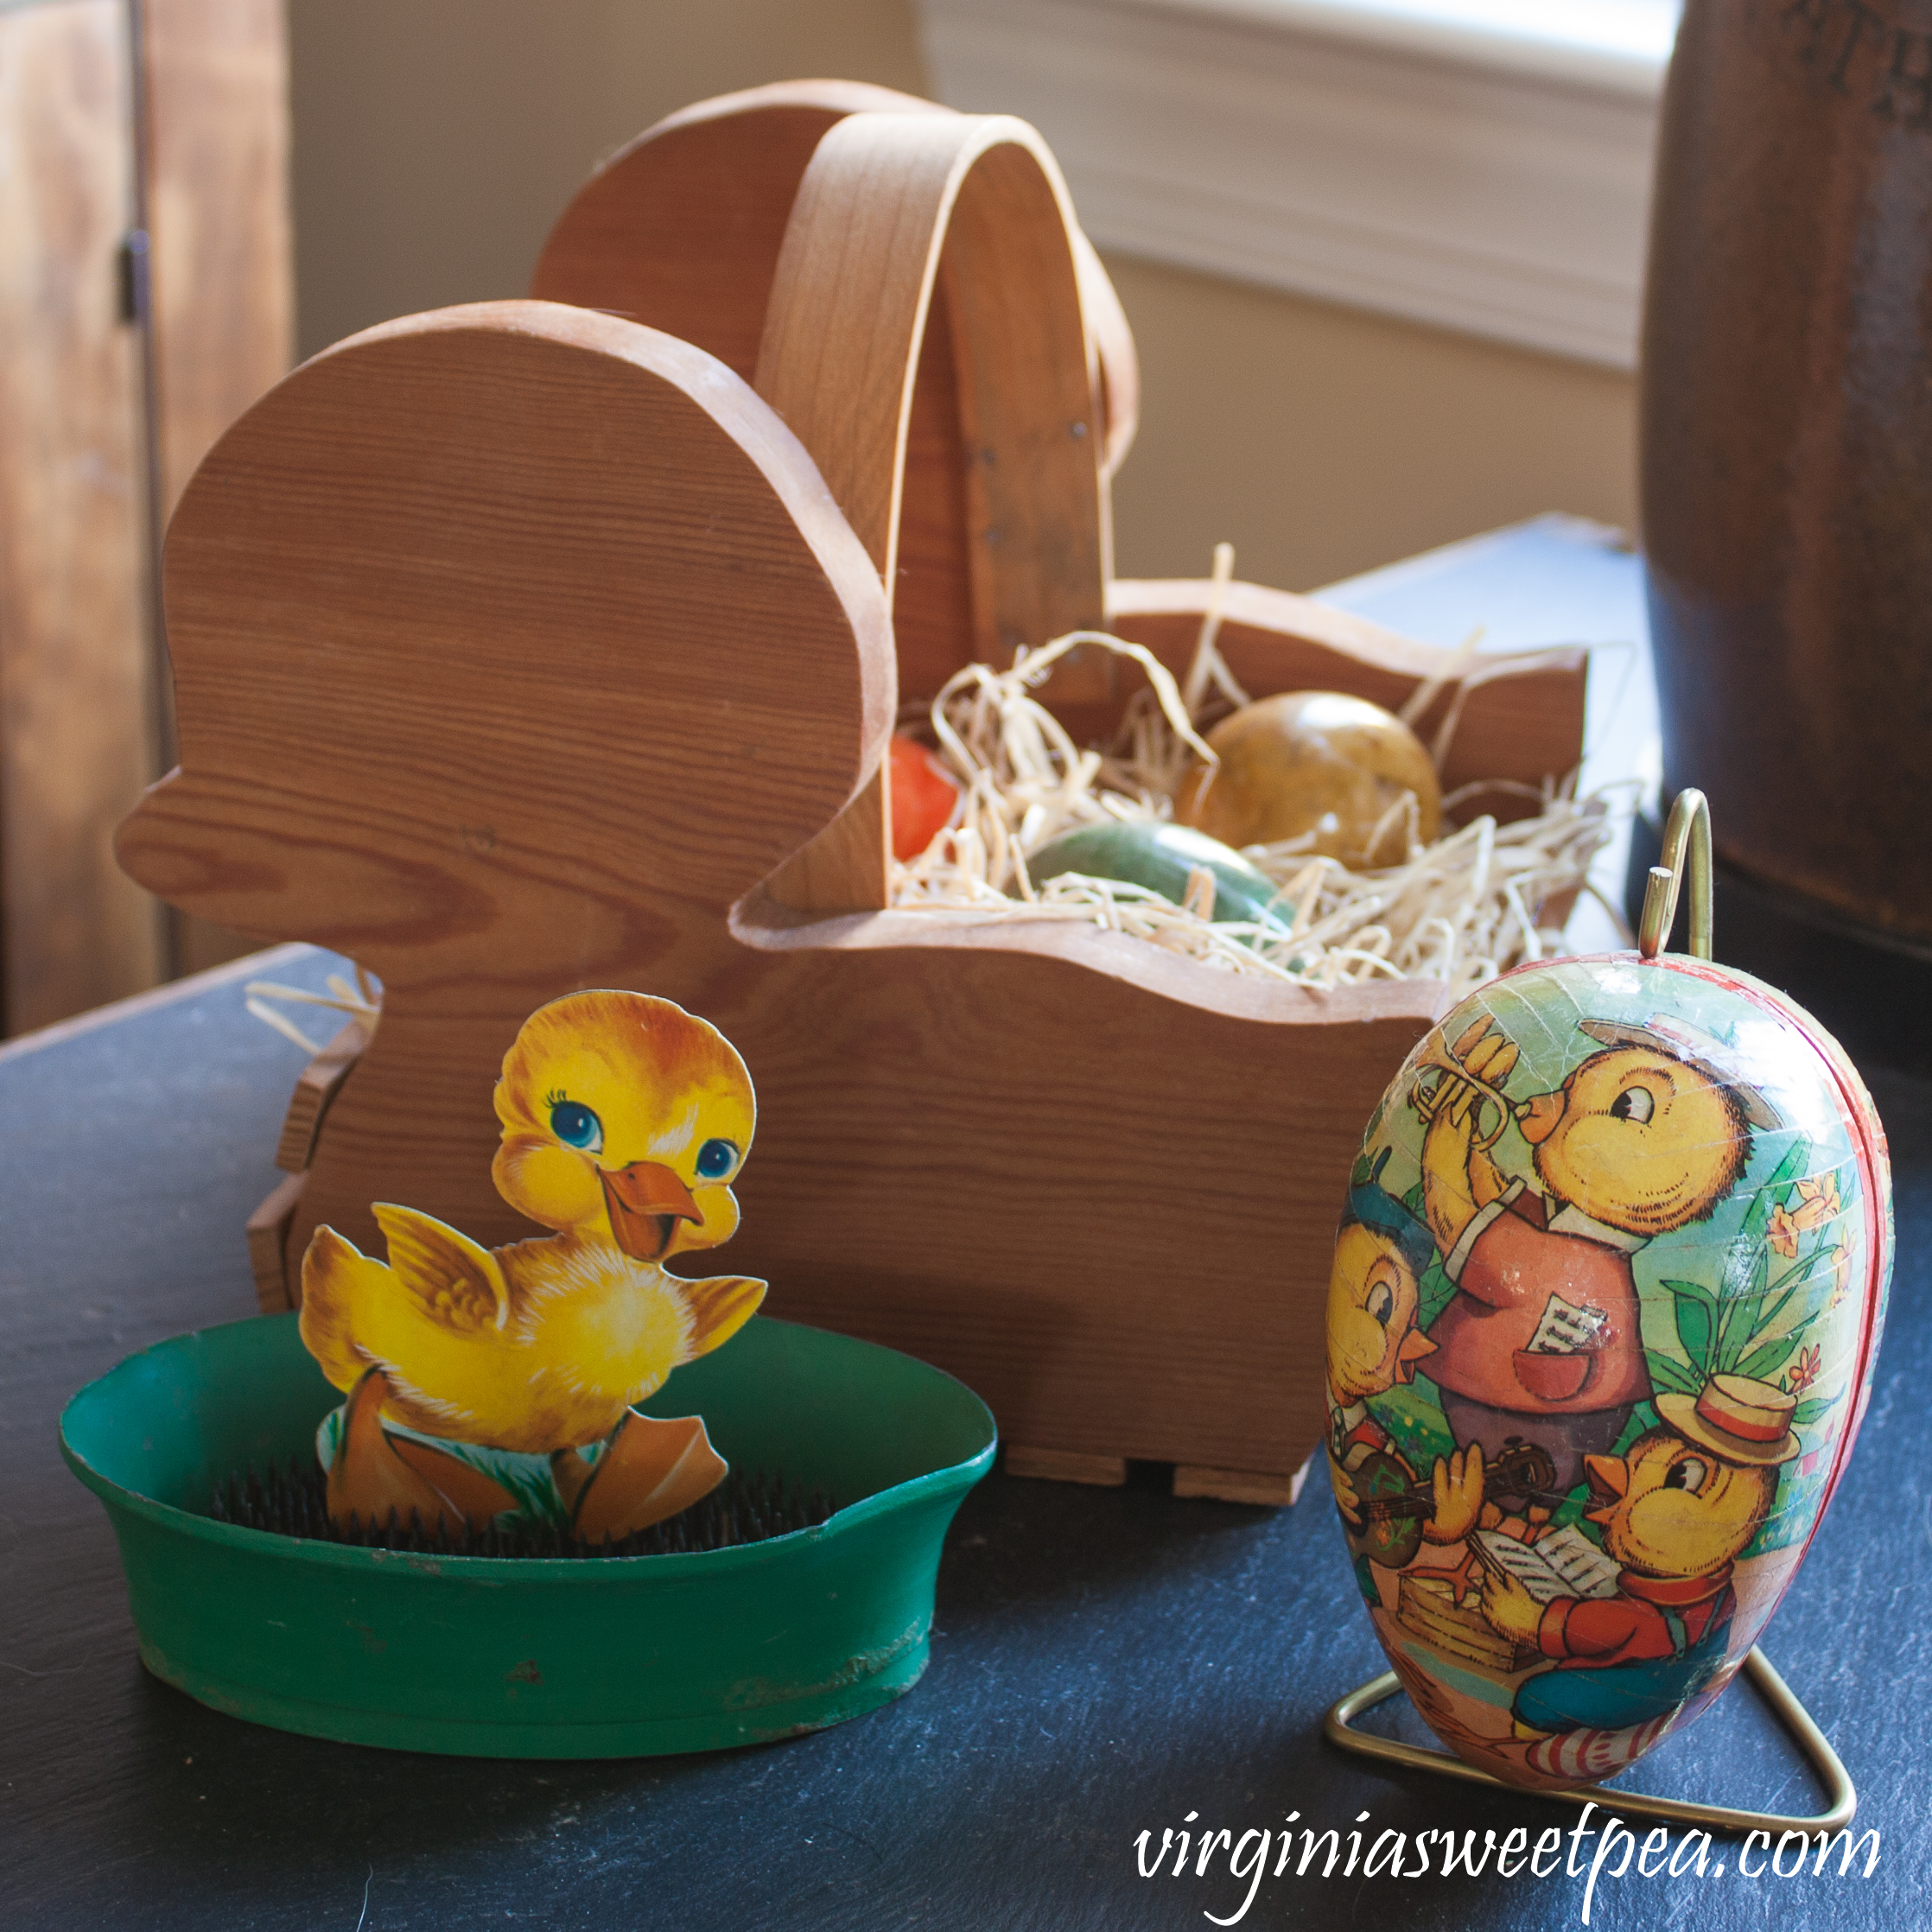 Vintage Easter Decorations - Handmade wooden chick basket from the 1980's filled with marble eggs, a German paper egg from the 1970's, and a vintage duck card displayed using a floral frog